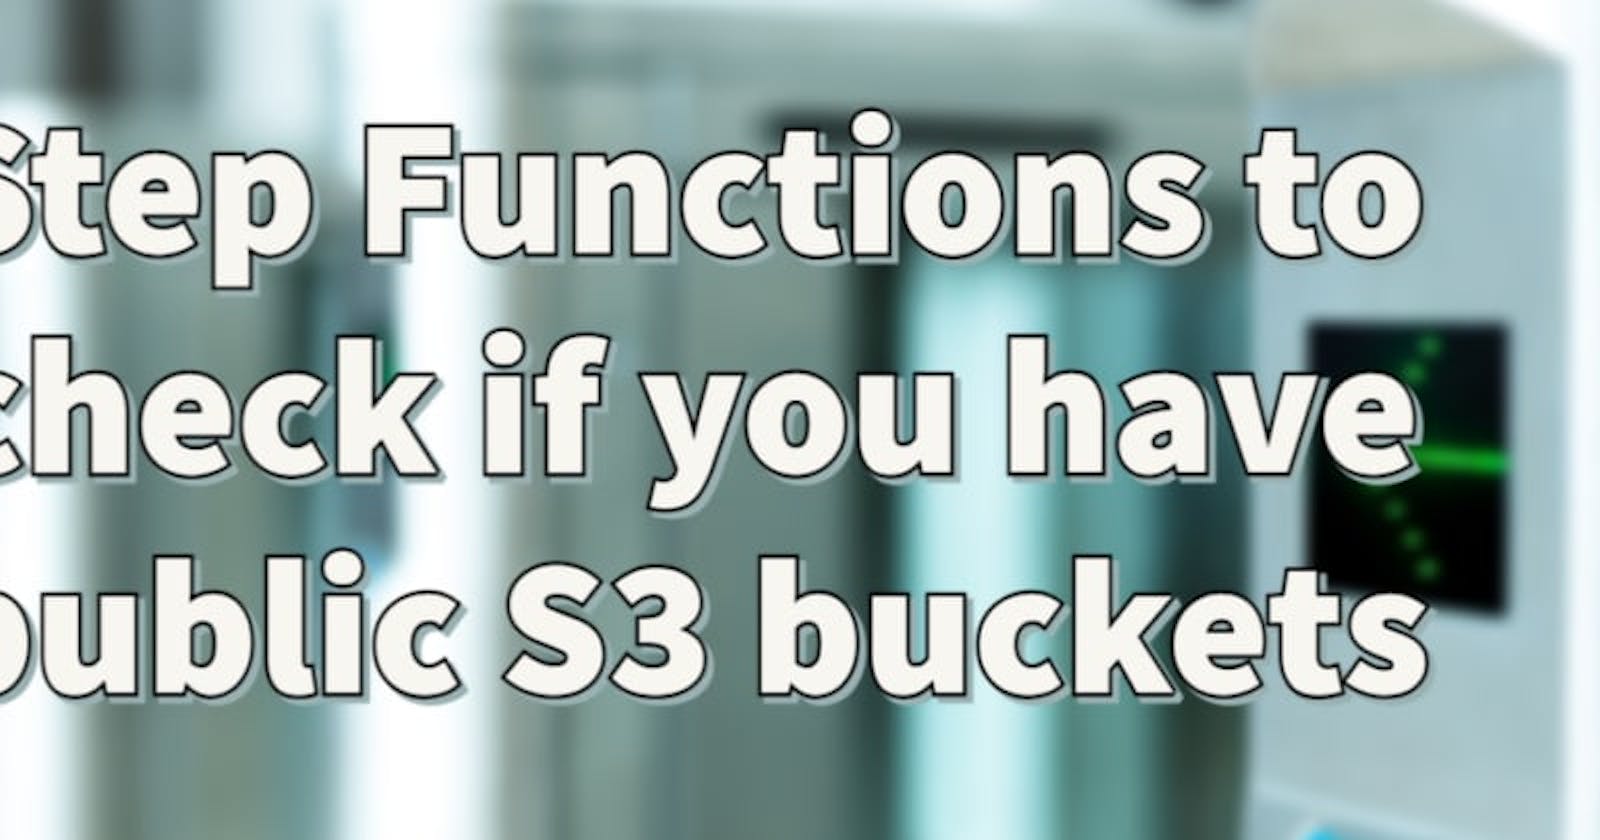 Step Functions to check if you have public S3 buckets